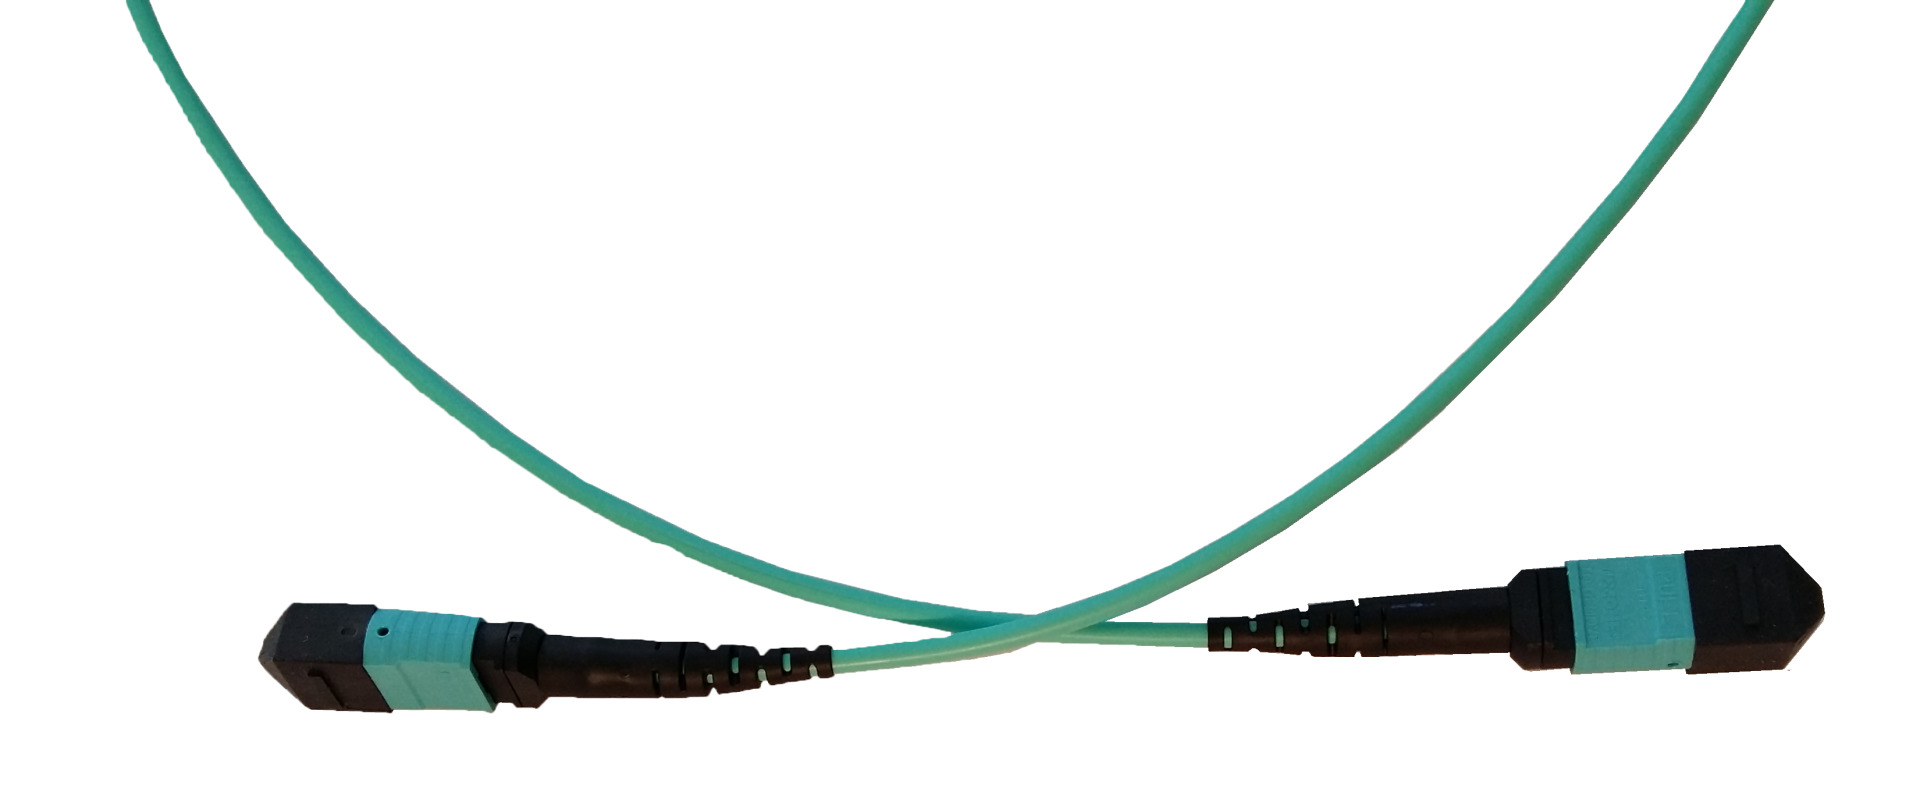 MTP/MPO Trunkcable 12 fiber MM OM3, 7m,Turquise, dobb.jacket OD=4,5mm